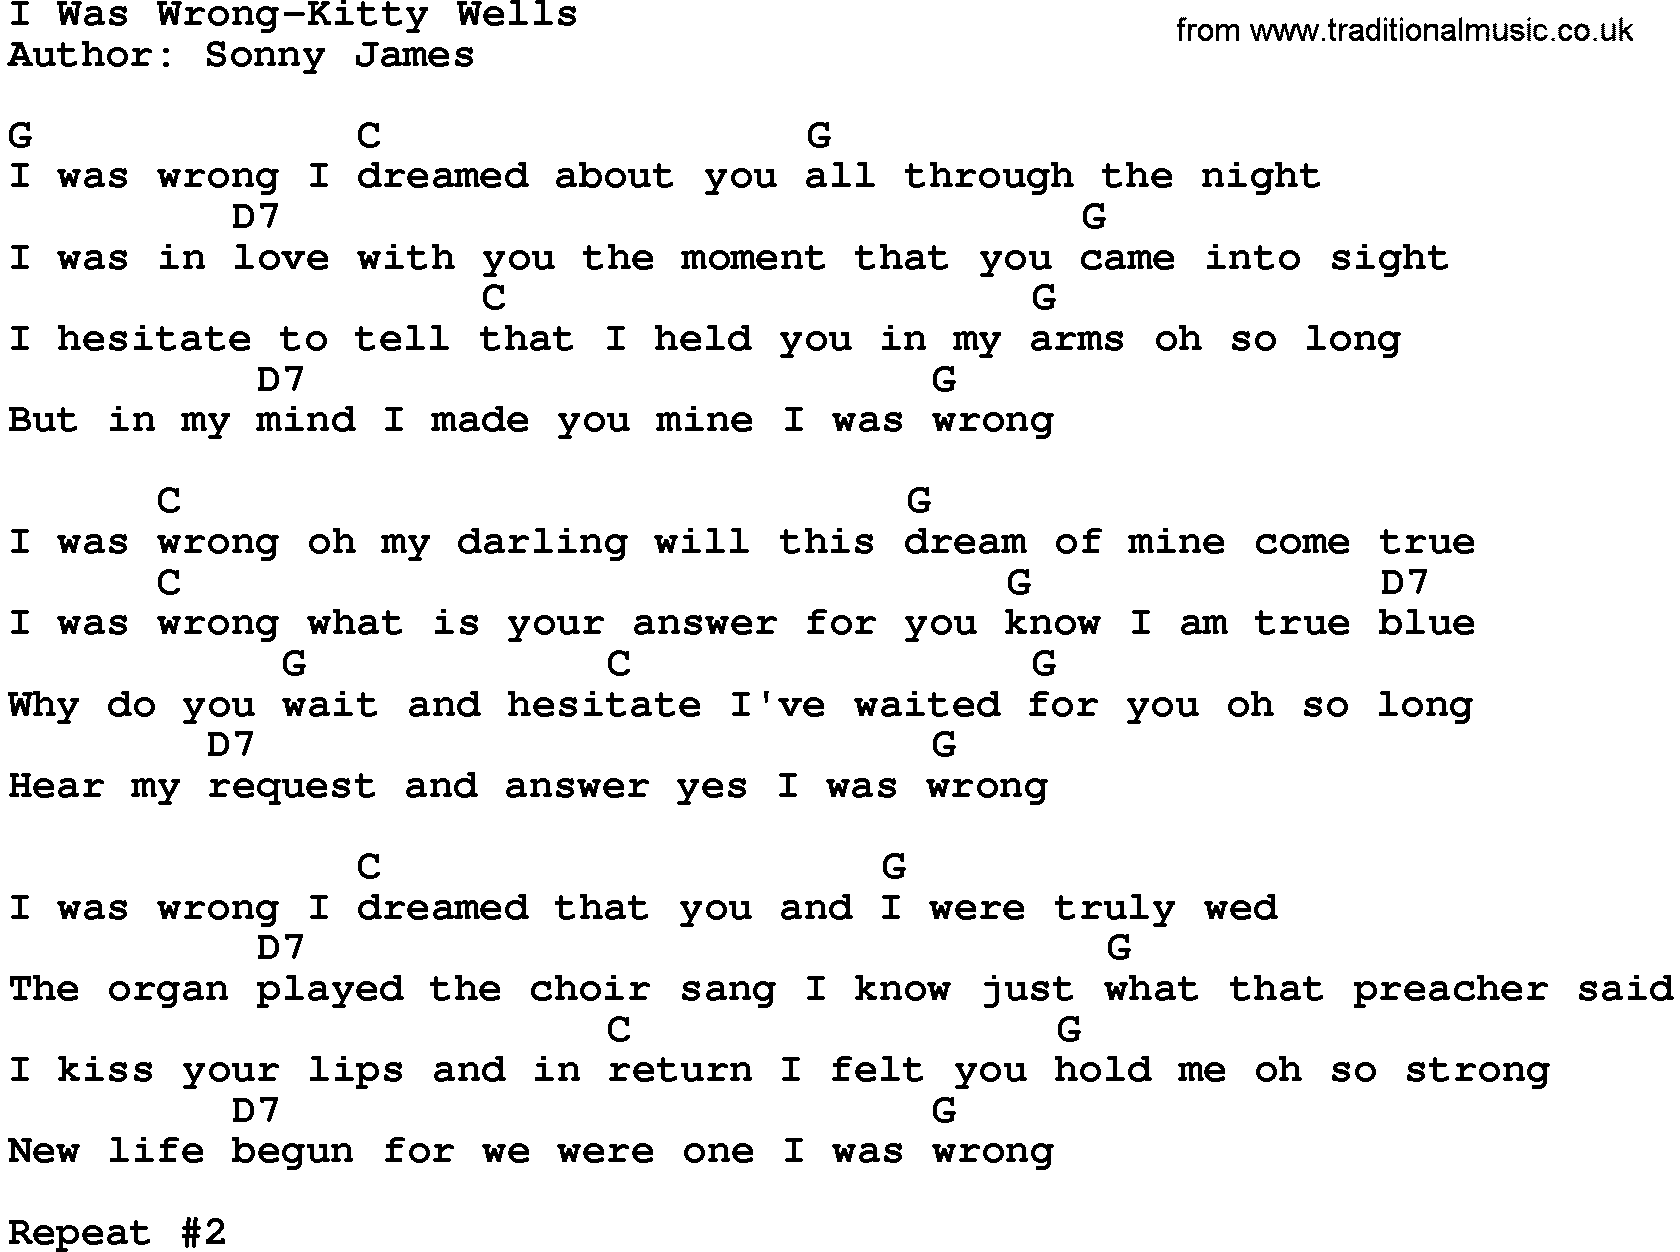 Country music song: I Was Wrong-Kitty Wells lyrics and chords